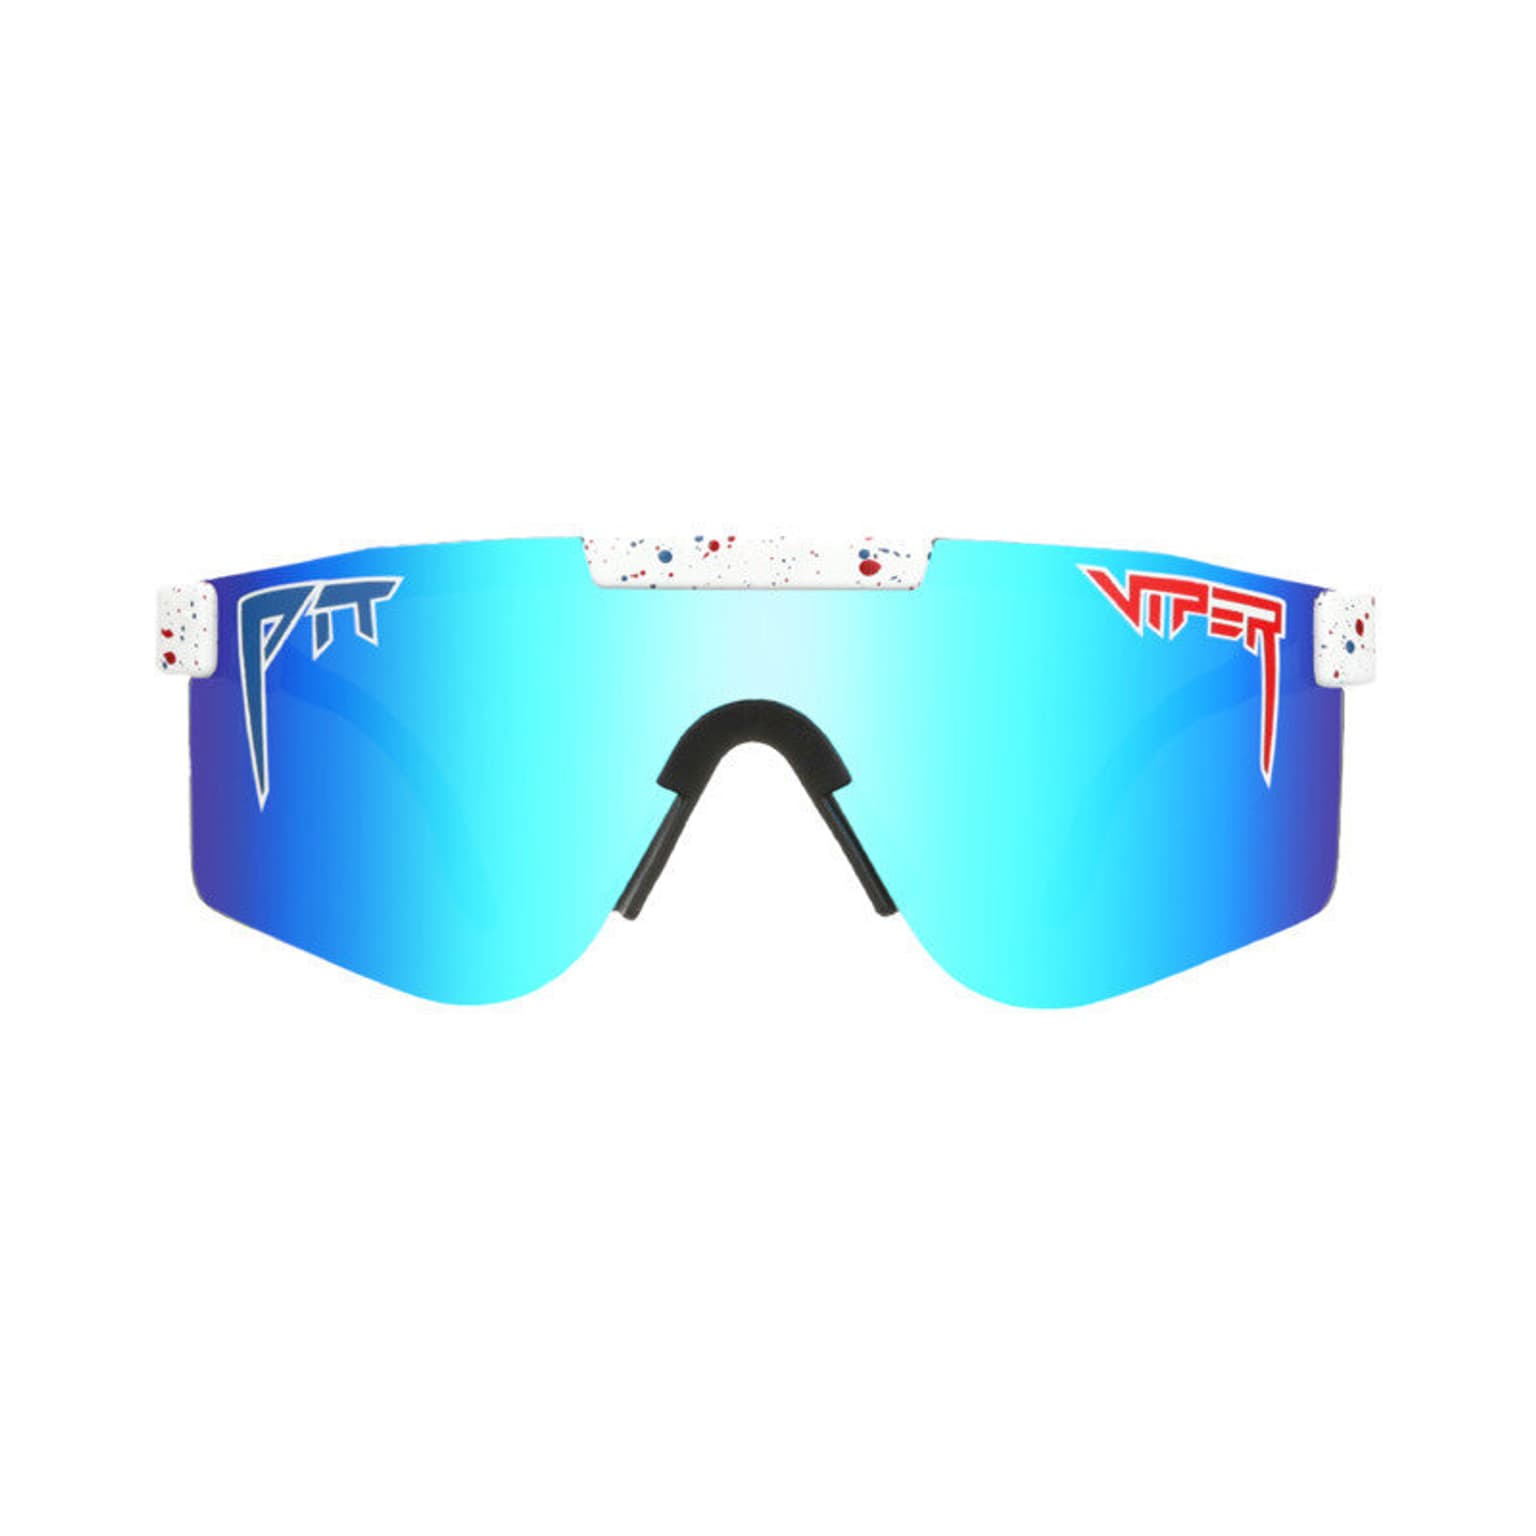 Pit Viper Pit Viper The Absolute Freedom Polarized Double Wide Sportbrille 1